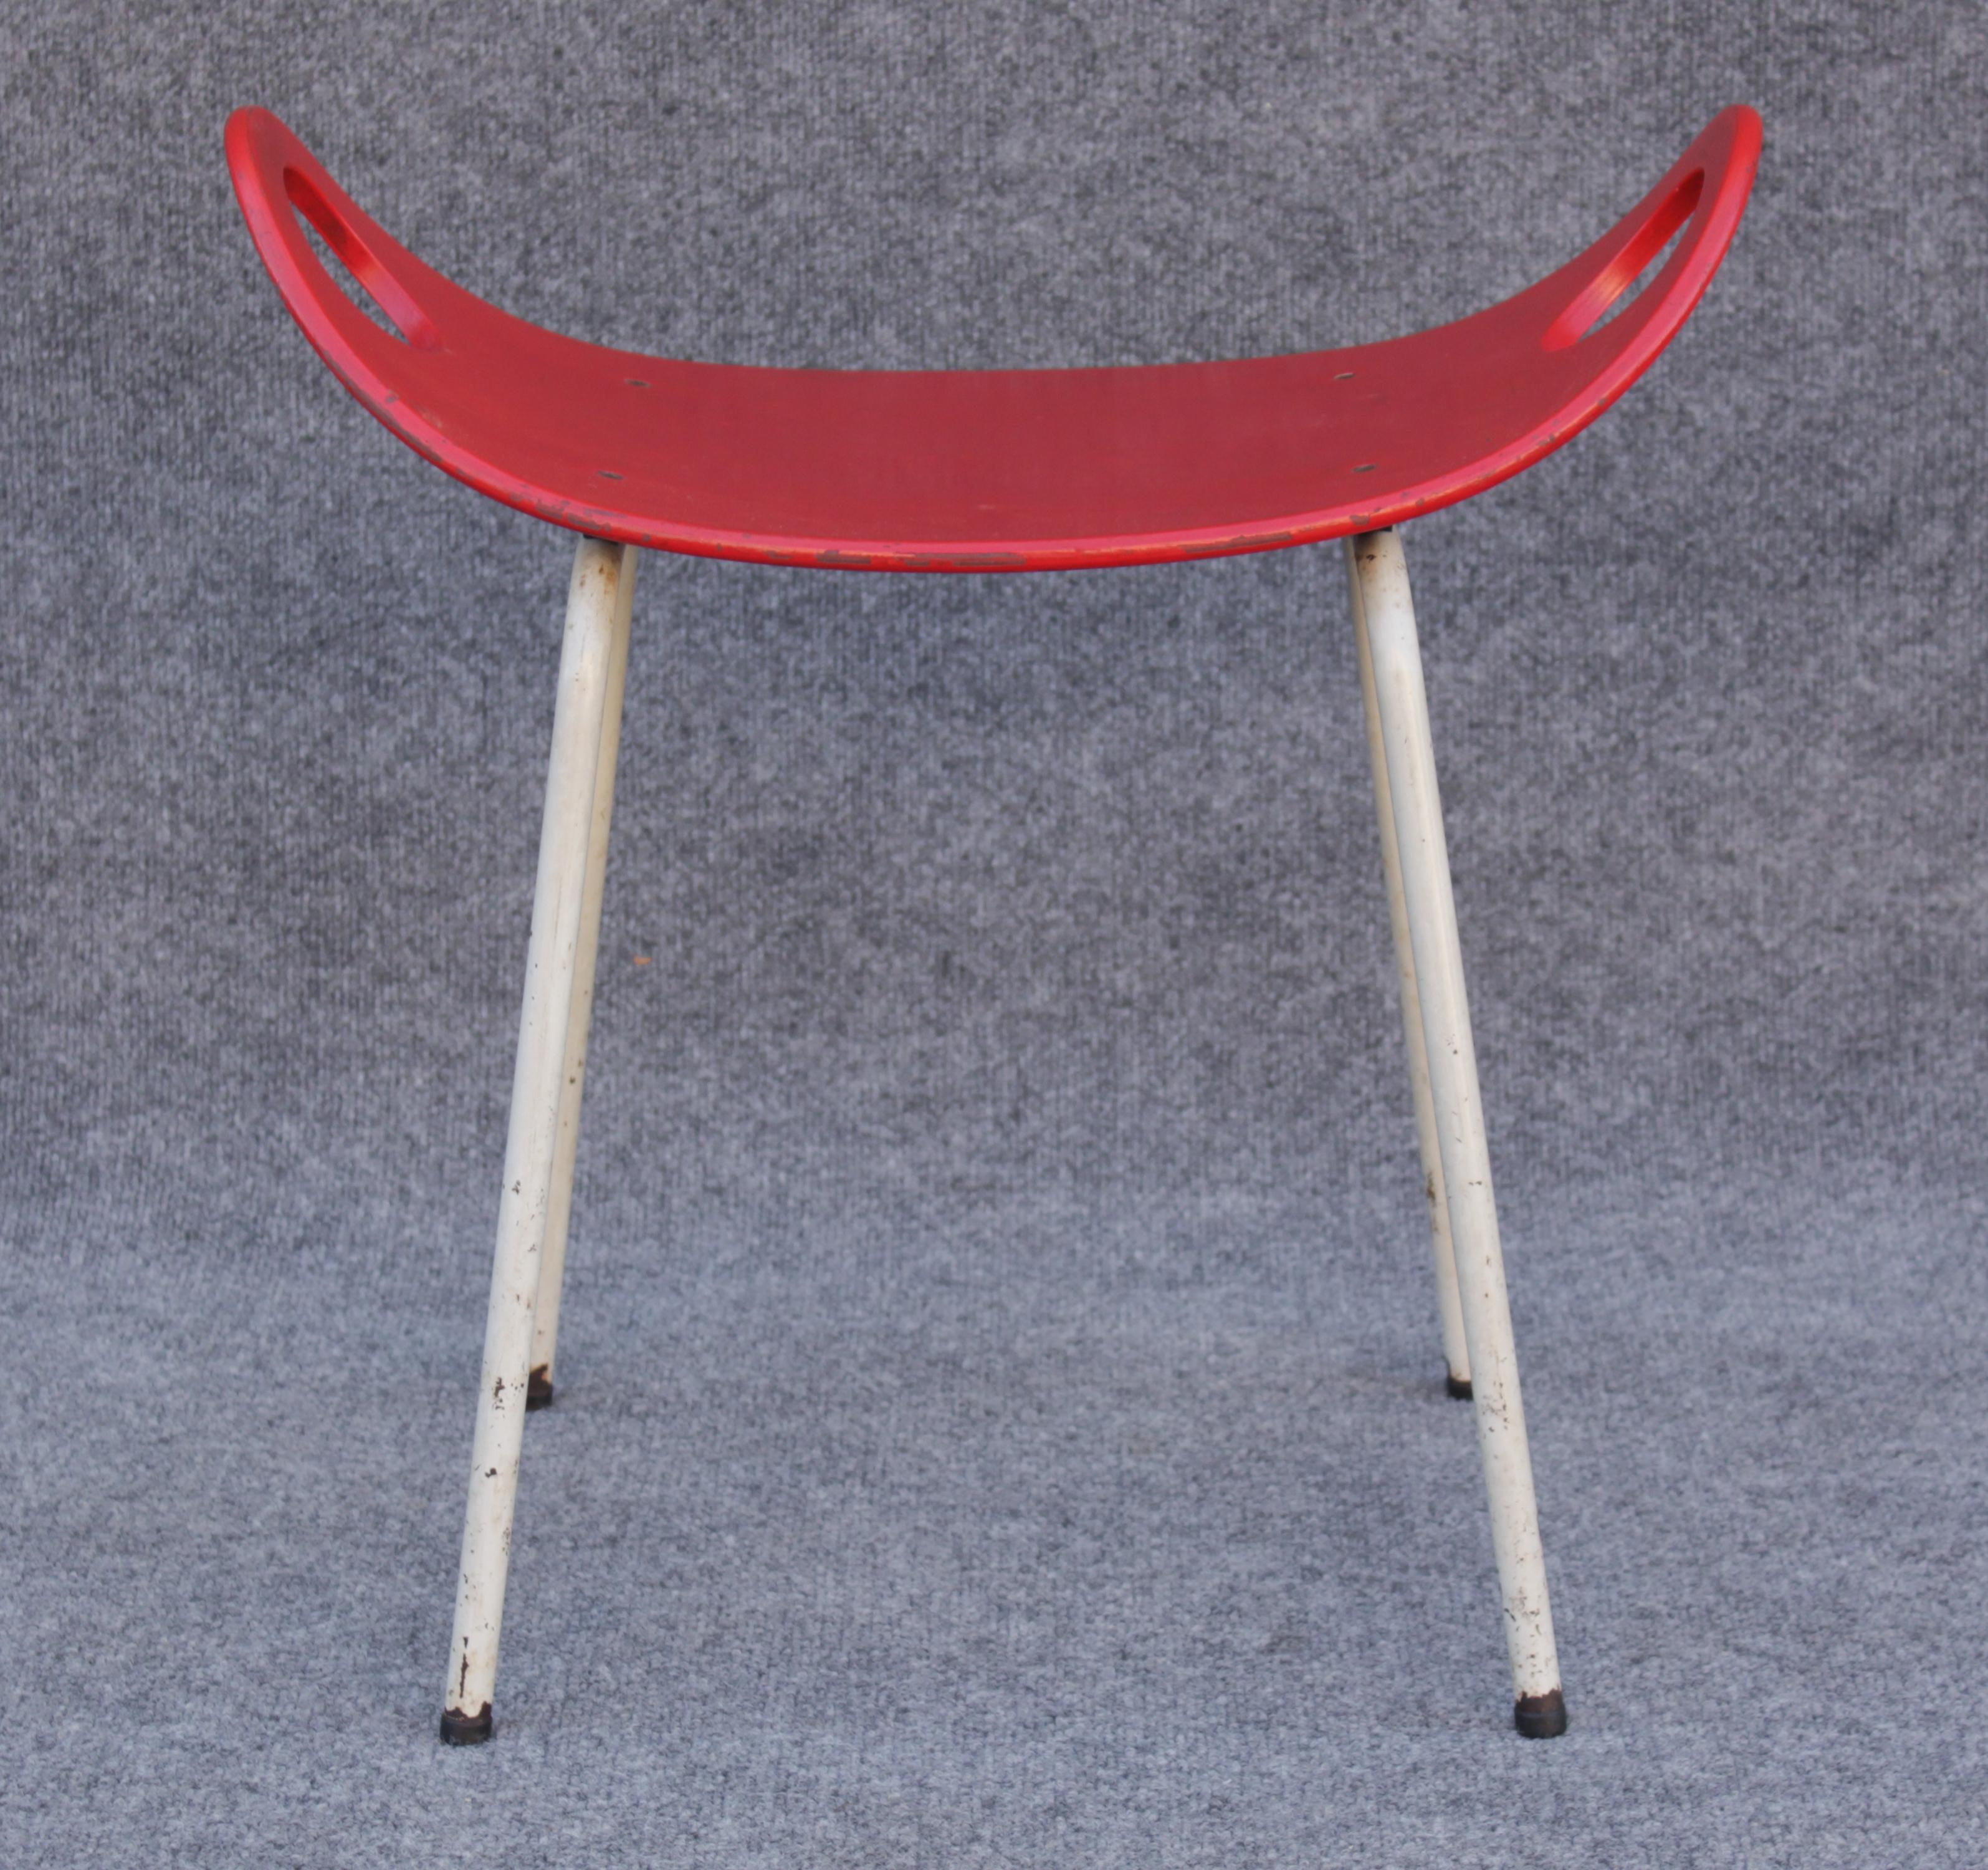 Designed in the 1950s by Olof Kettunen, this example is one of the few imported into the US by Stendig. Stendig wasn't around for a very long time, and no longer has any active showrooms. Manufactured by J. Merivaara in Scandinavia, it has a seat of